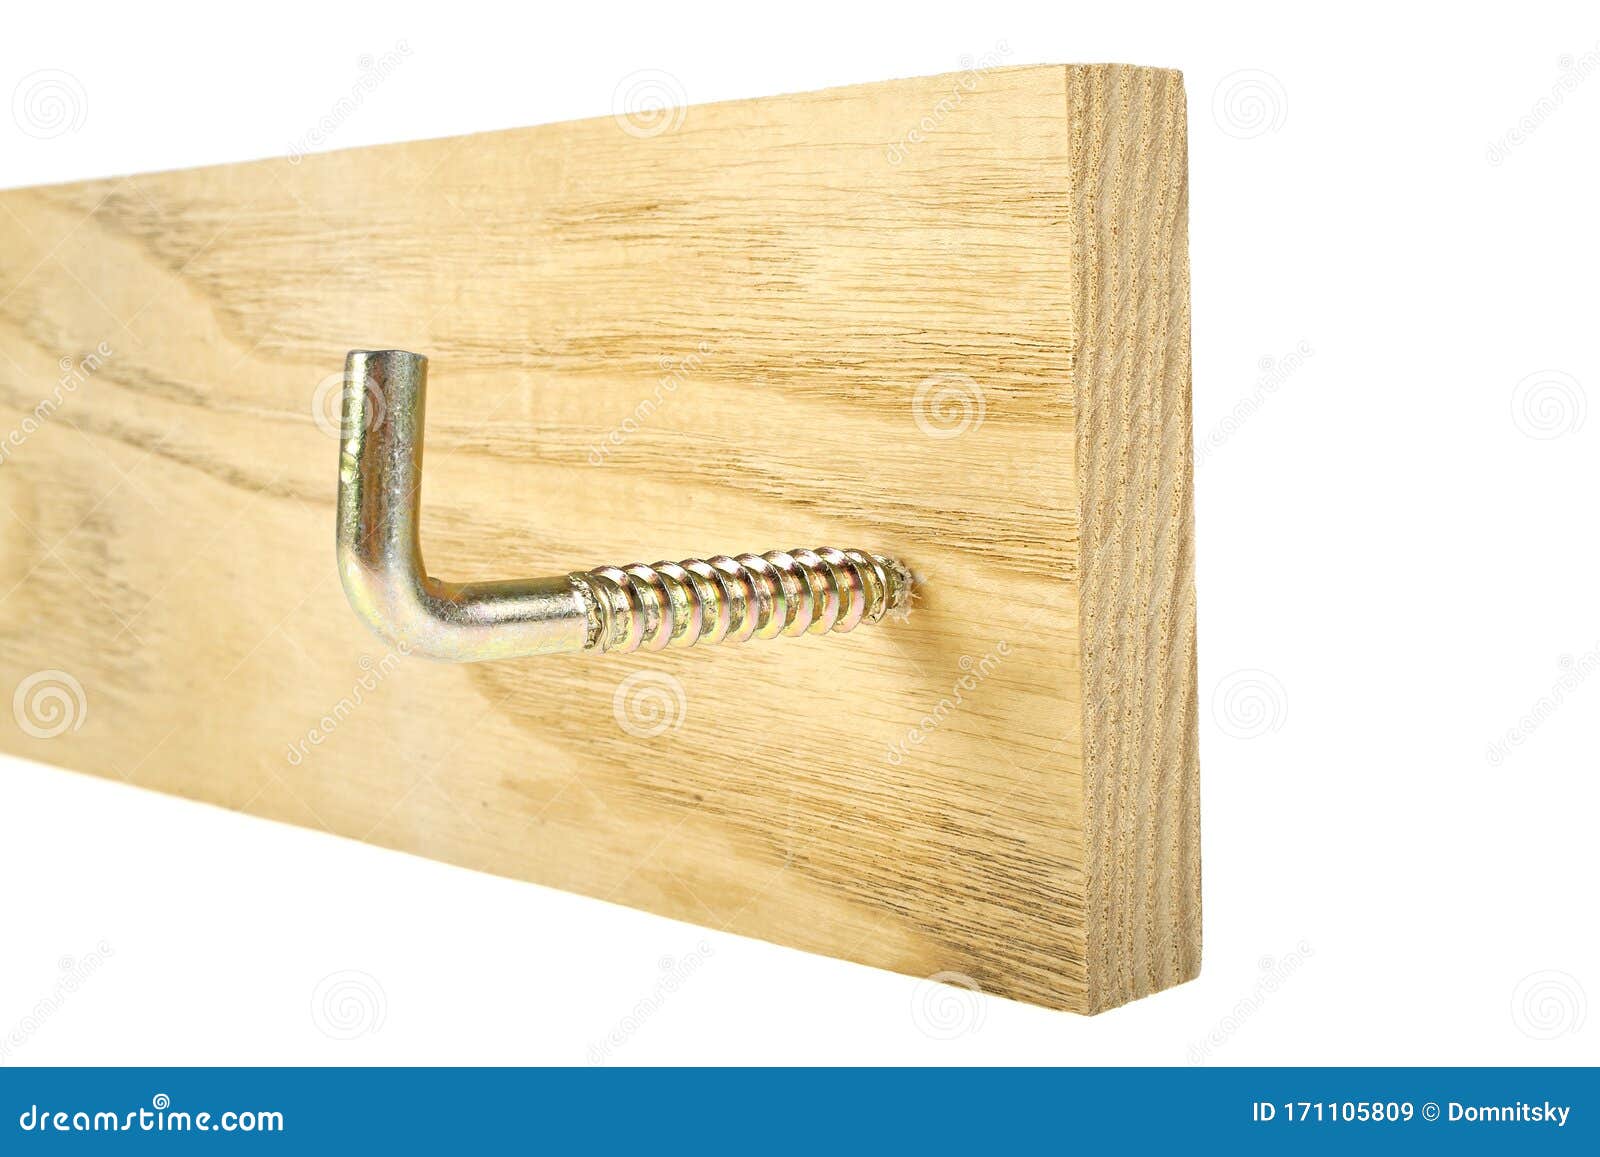 Hook Screwed into the Wooden Plank, White Background Stock Image - Image of  metal, lumber: 171105809